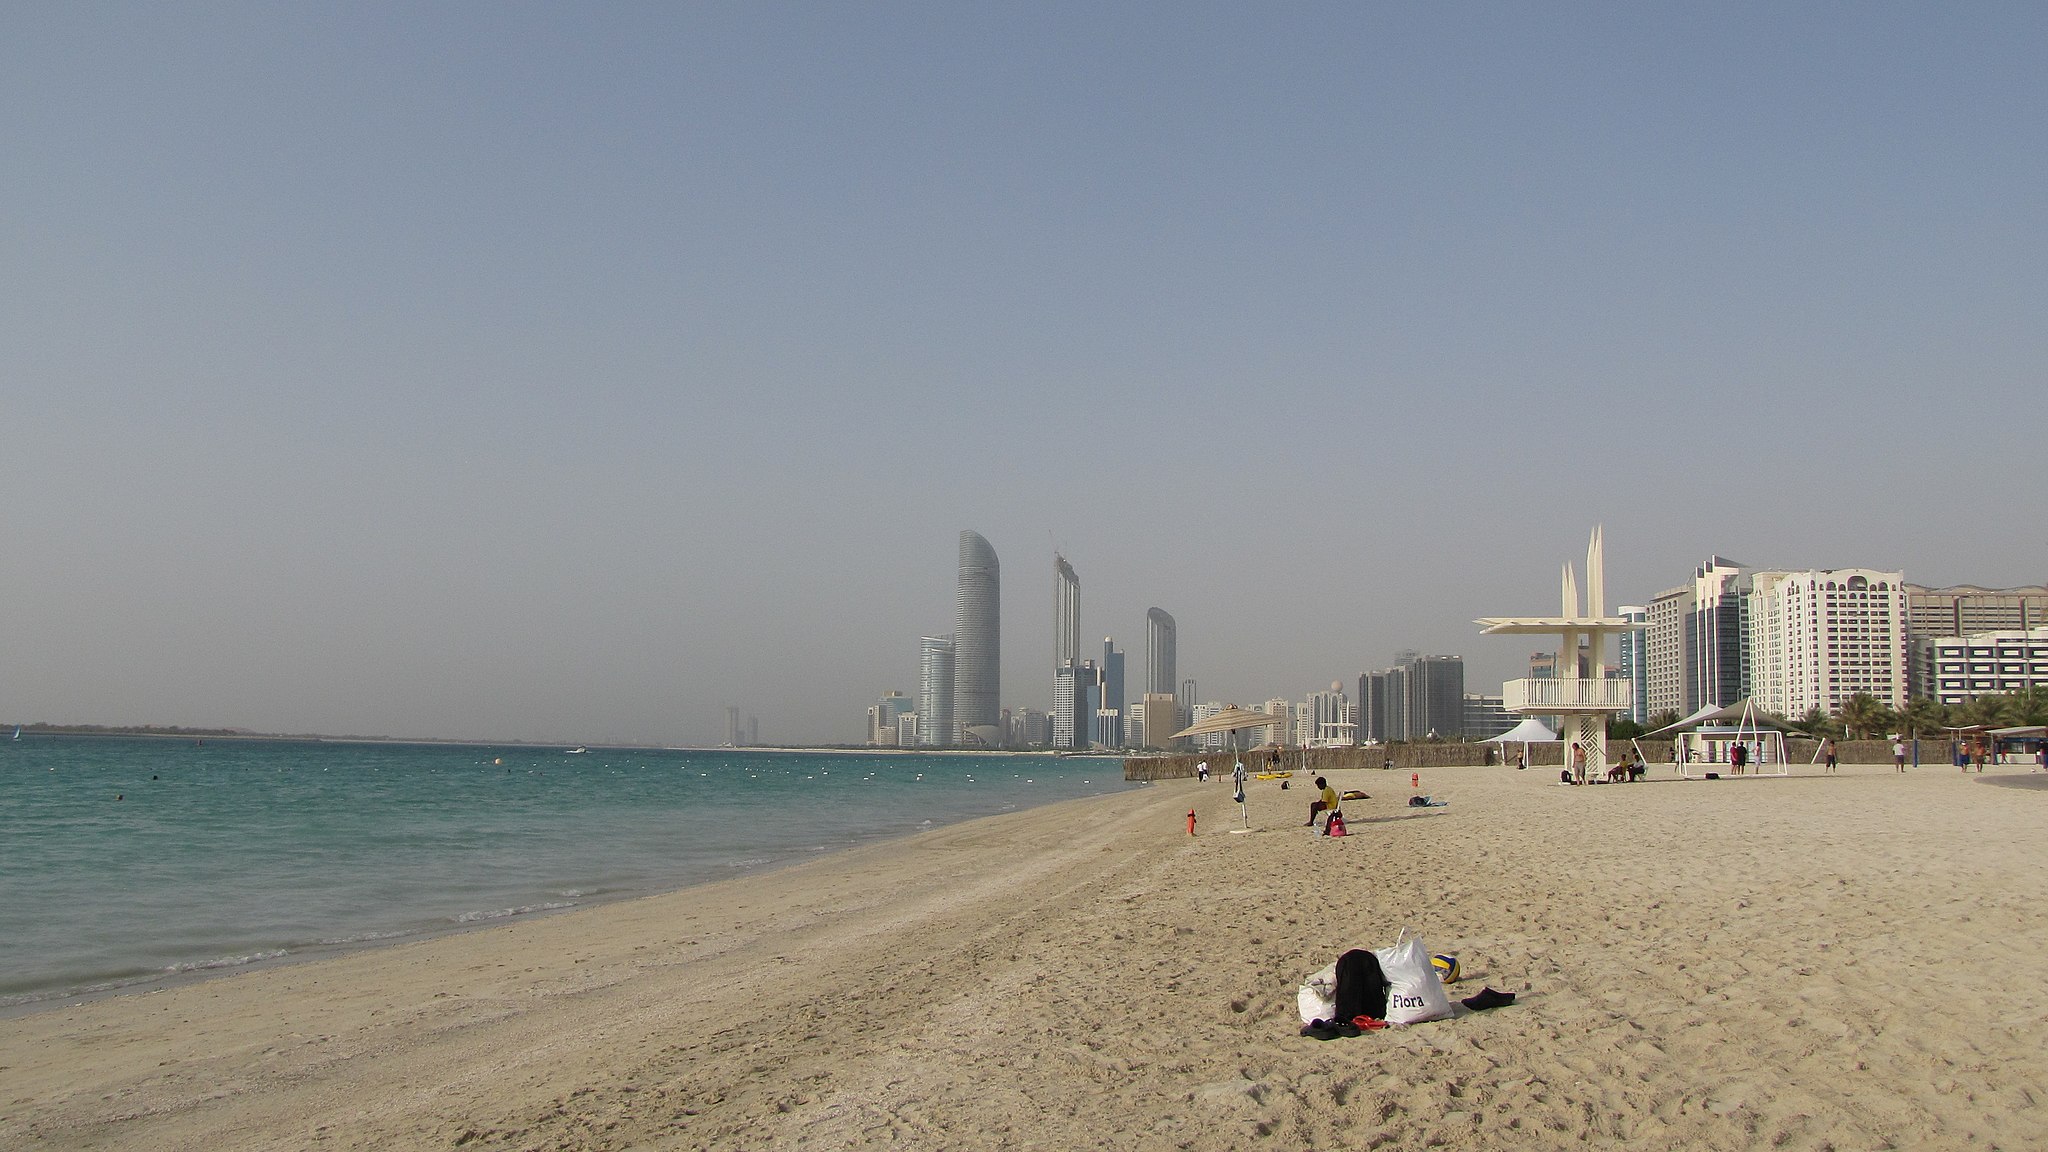 Opinion: can we leave no footprints in a fast-developing city like Abu Dhabi?